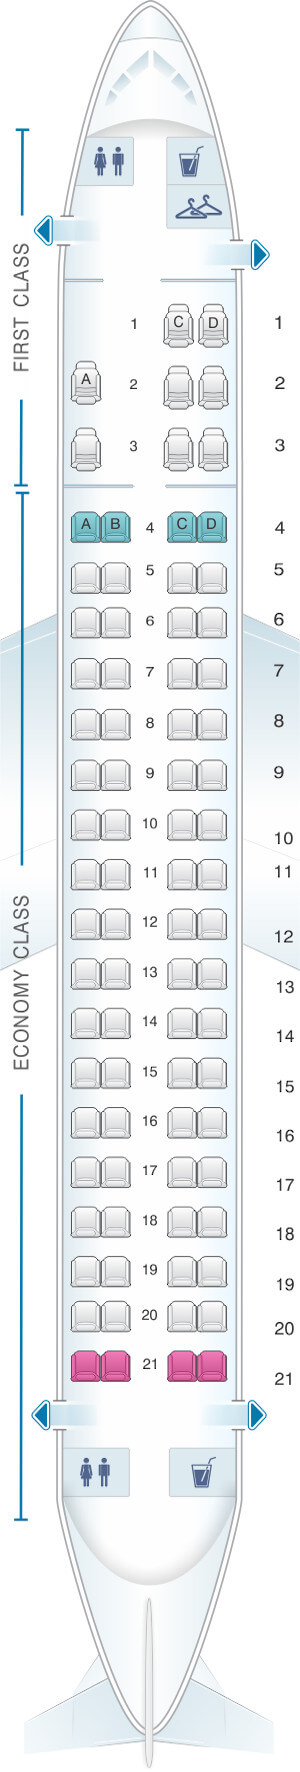 American Airlines Embraer 175 Seat Map